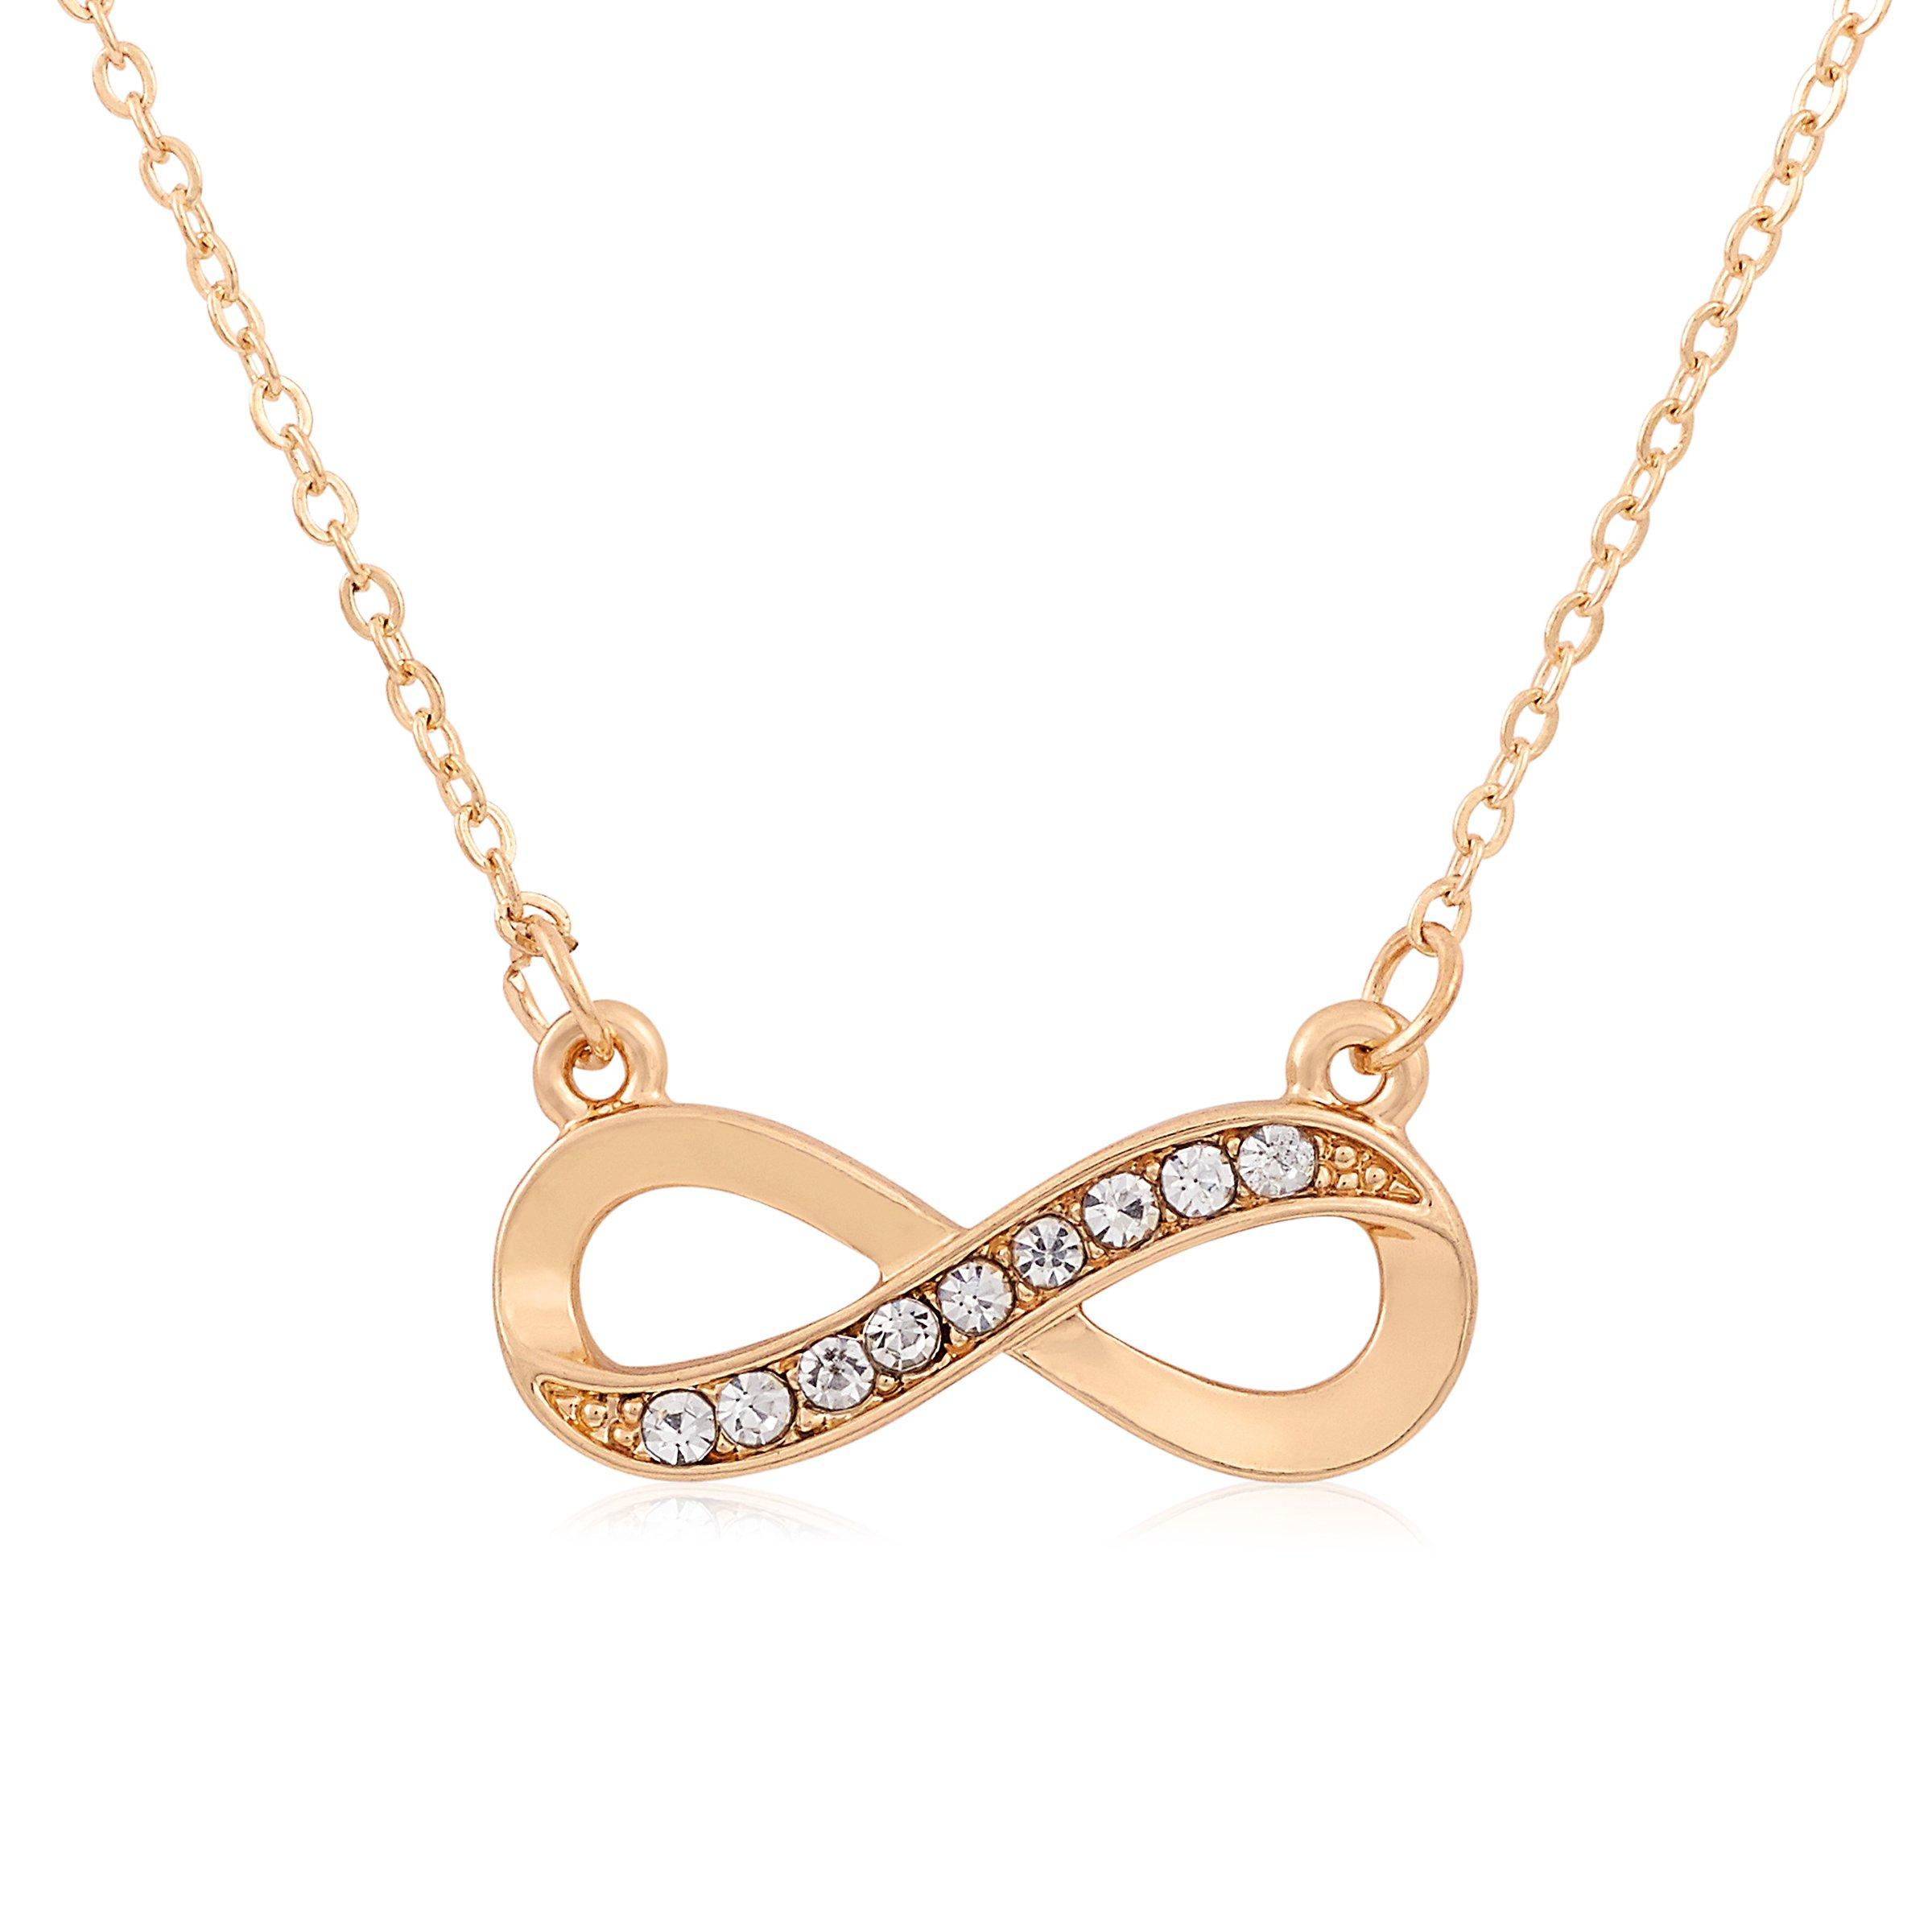 Buy Sparkle Infinity on Chain Online | Truworths